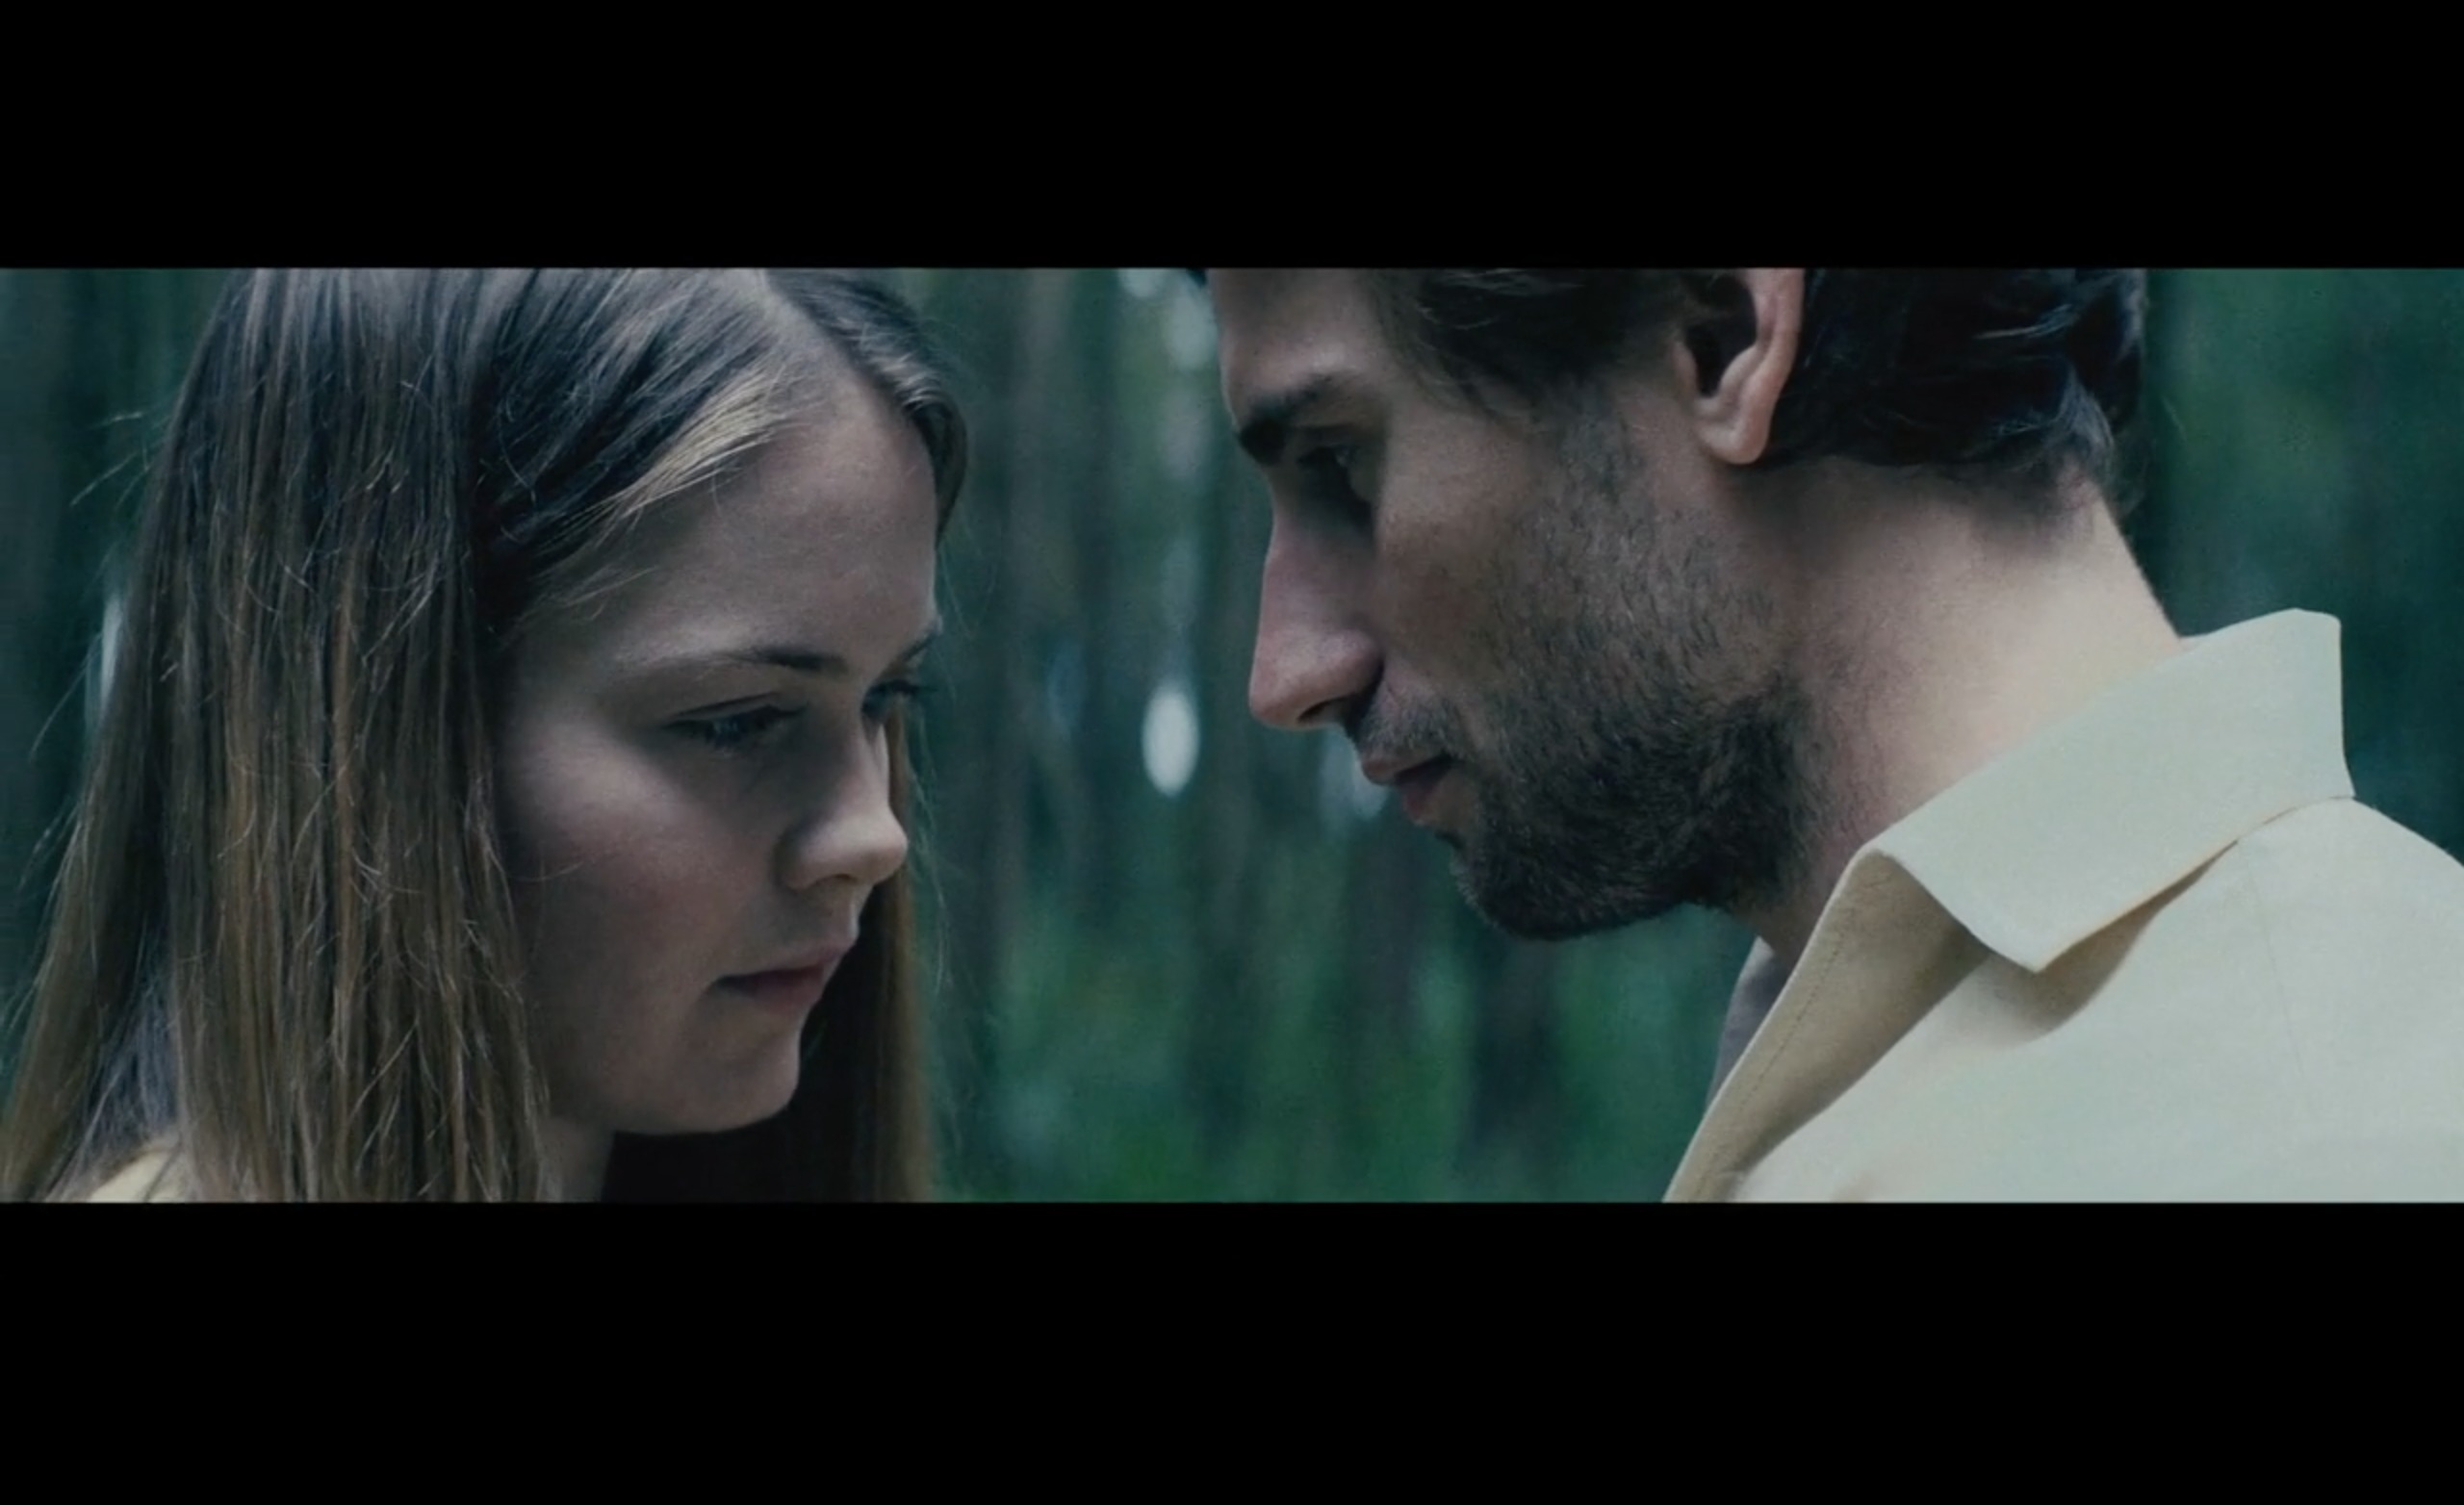 Still of Hera Hilmar and Edward Holcroft in Bitter music video for Palace directed by Liam Saint-Pierre